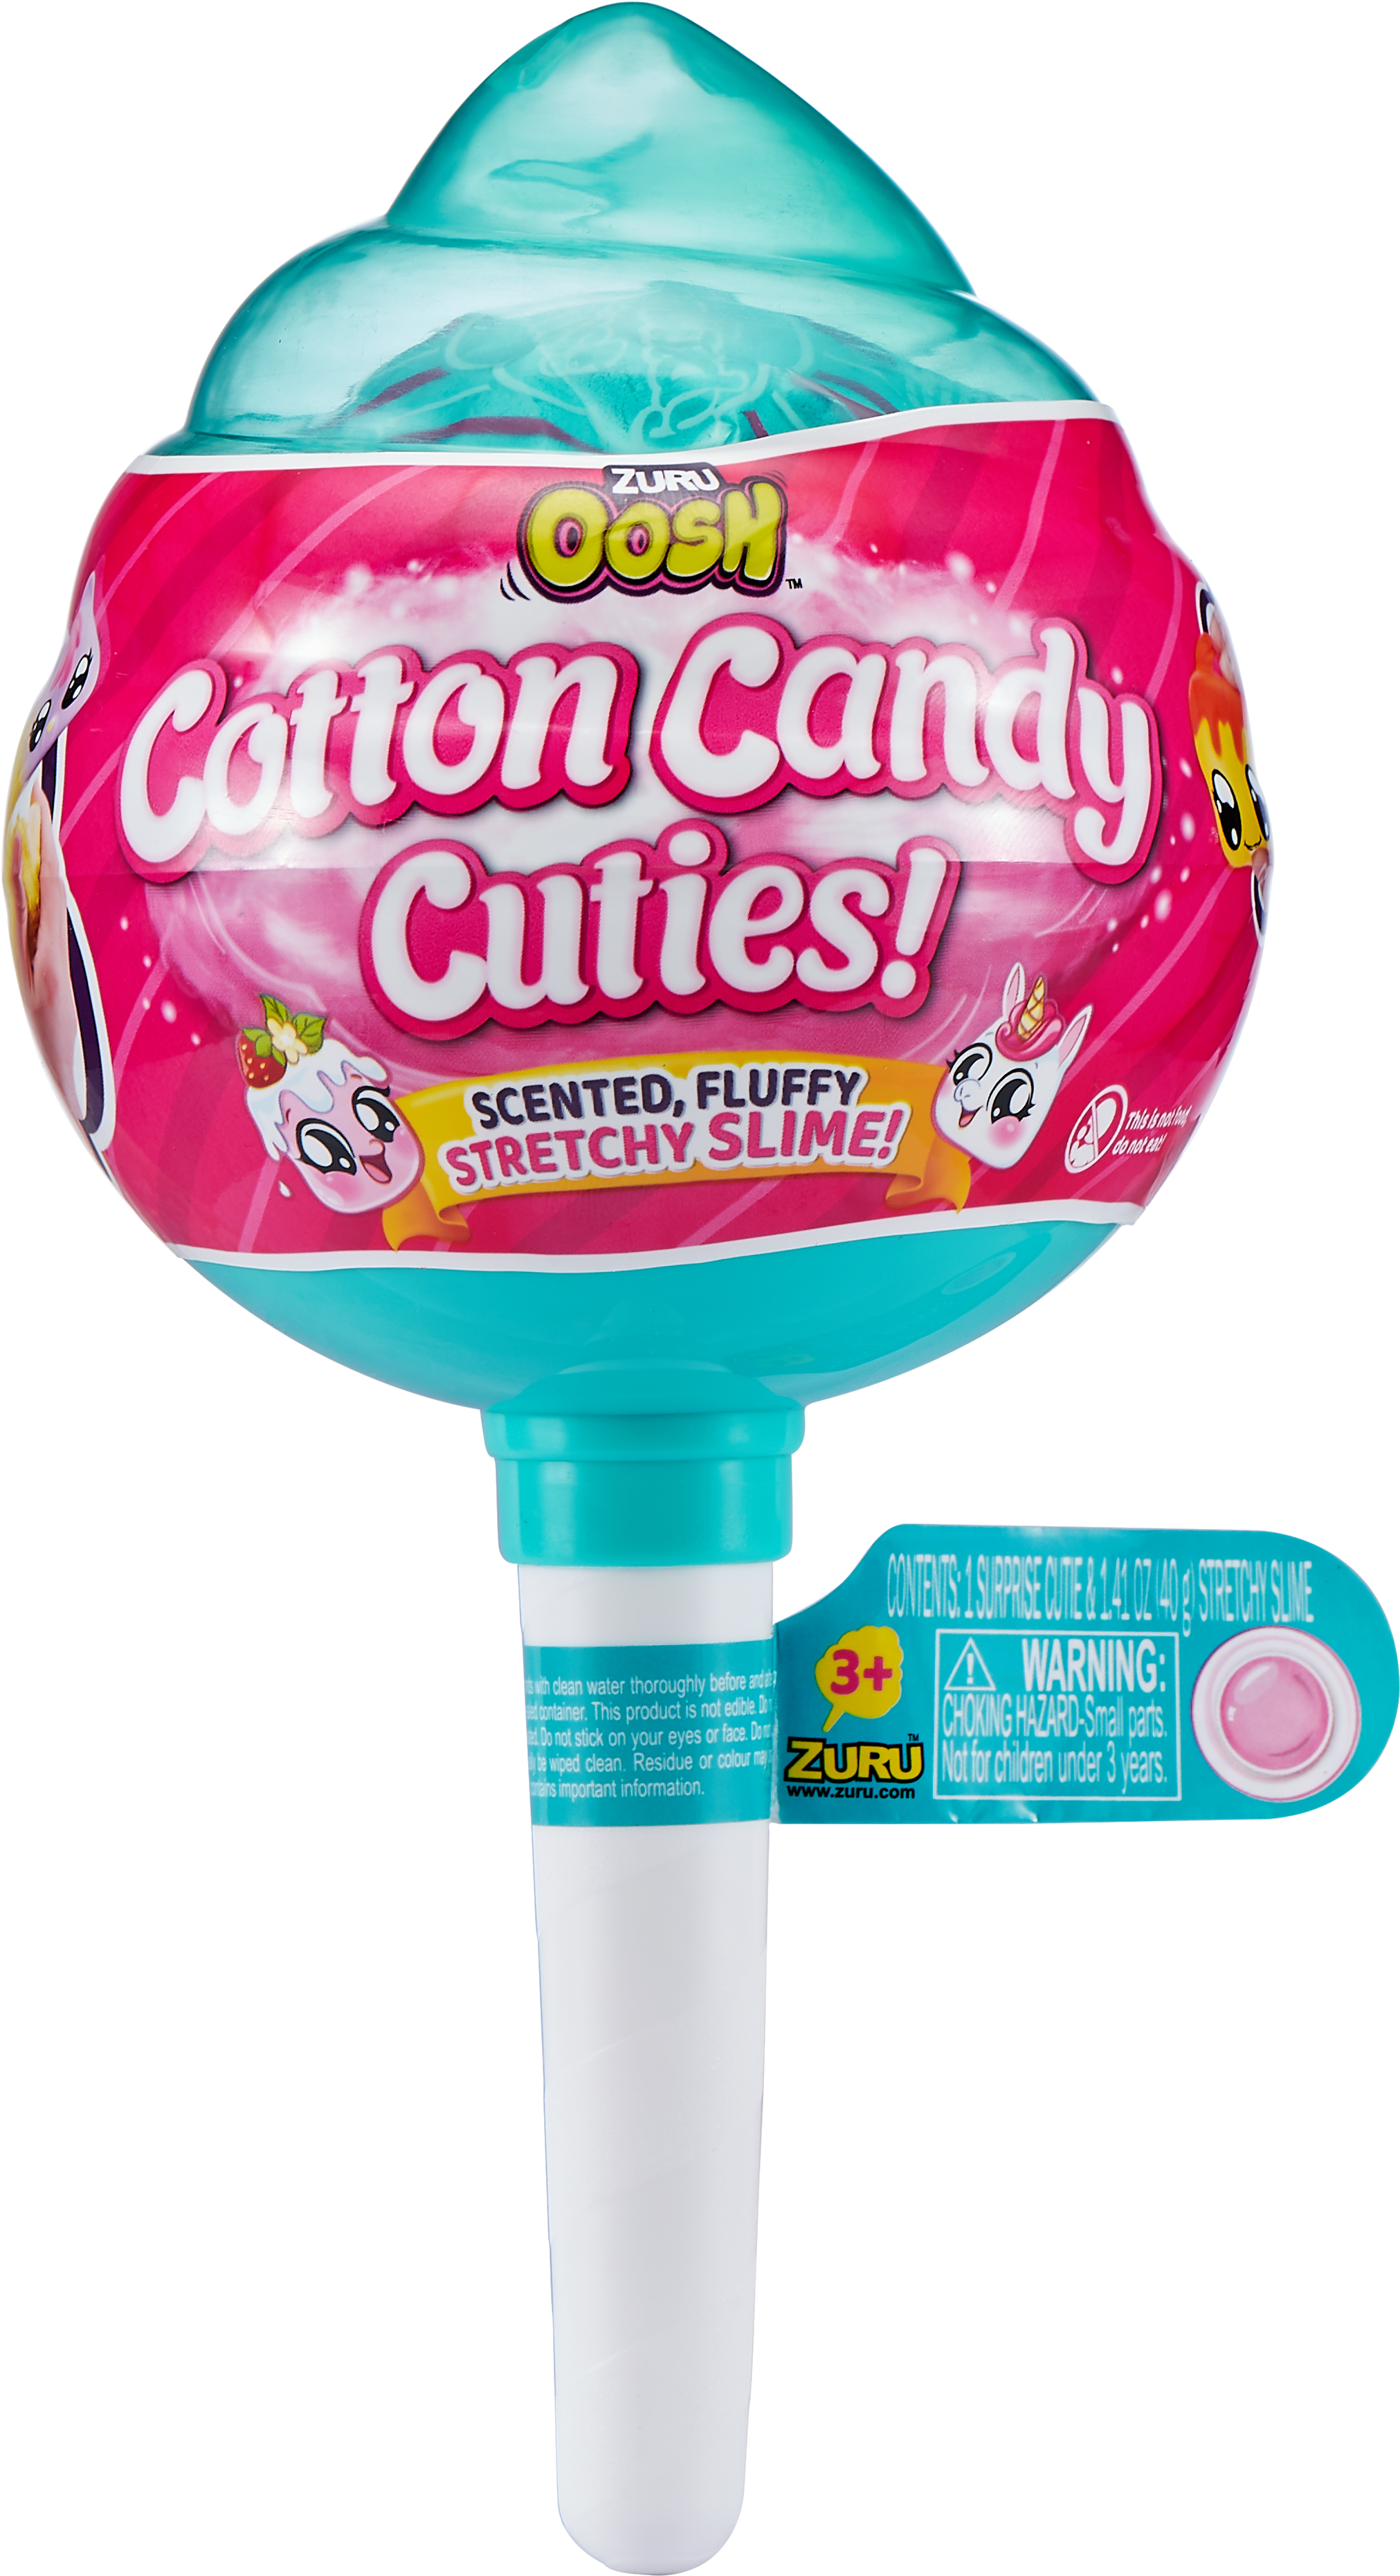 Zuru Oosh Cotton Candy Cuties Scented Slime With Collectible - Cotton Candy Cuties Walmart (3908x3908)